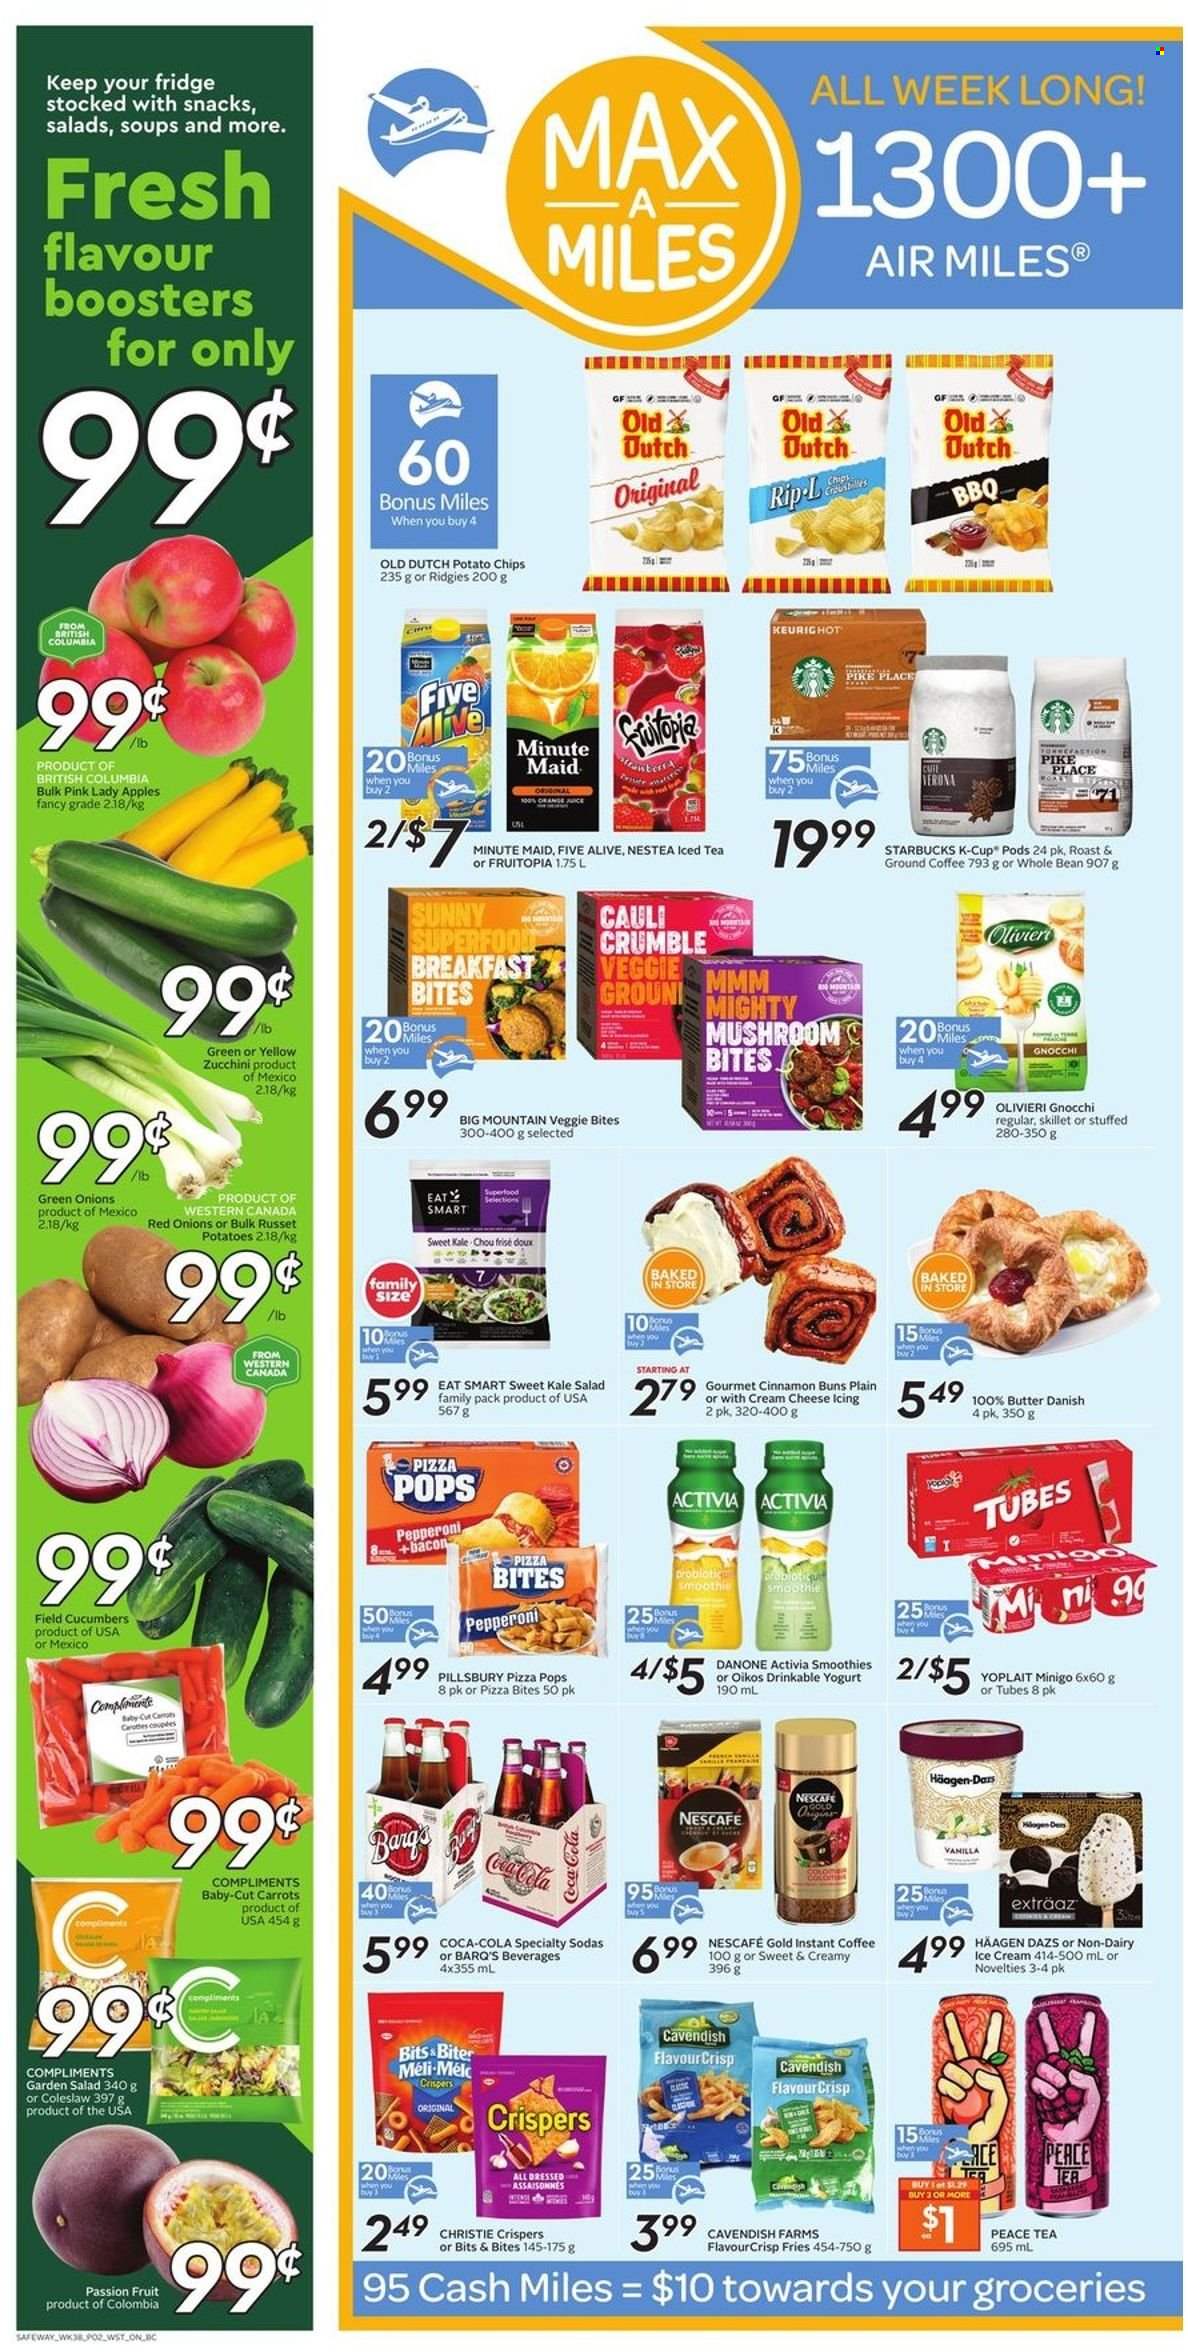 thumbnail - Safeway Flyer - January 13, 2022 - January 19, 2022 - Sales products - buns, carrots, cucumber, russet potatoes, zucchini, kale, salad, green onion, apples, Pink Lady, coleslaw, pizza, Pillsbury, bacon, pepperoni, yoghurt, Activia, Oikos, Yoplait, butter, ice cream, Häagen-Dazs, potato fries, snack, potato chips, cinnamon, Coca-Cola, ice tea, fruit punch, smoothie, instant coffee, ground coffee, coffee capsules, Starbucks, K-Cups, Danone, gnocchi, chips, Nescafé. Page 3.